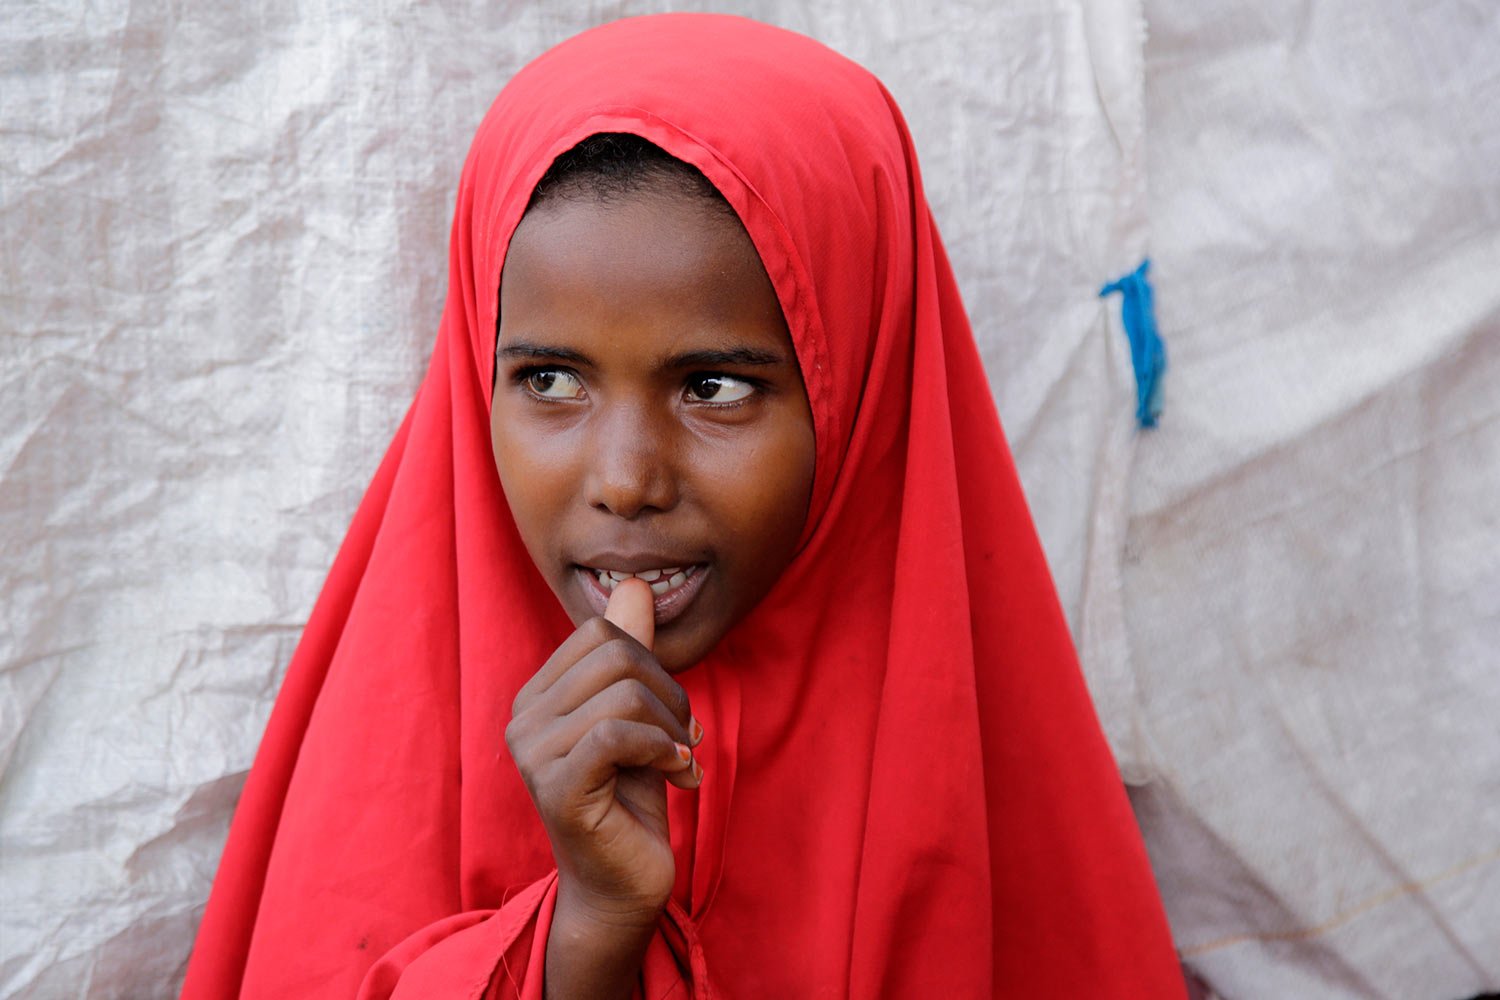  Shukri Mohamed Ibrahim, who fled amid a drought with her family, stands in a makeshift camp for displaced people, on the outskirts of Mogadishu, Somalia, on Thursday, Sept. 28, 2023. (AP Photo/Farah Abdi Warsameh) 